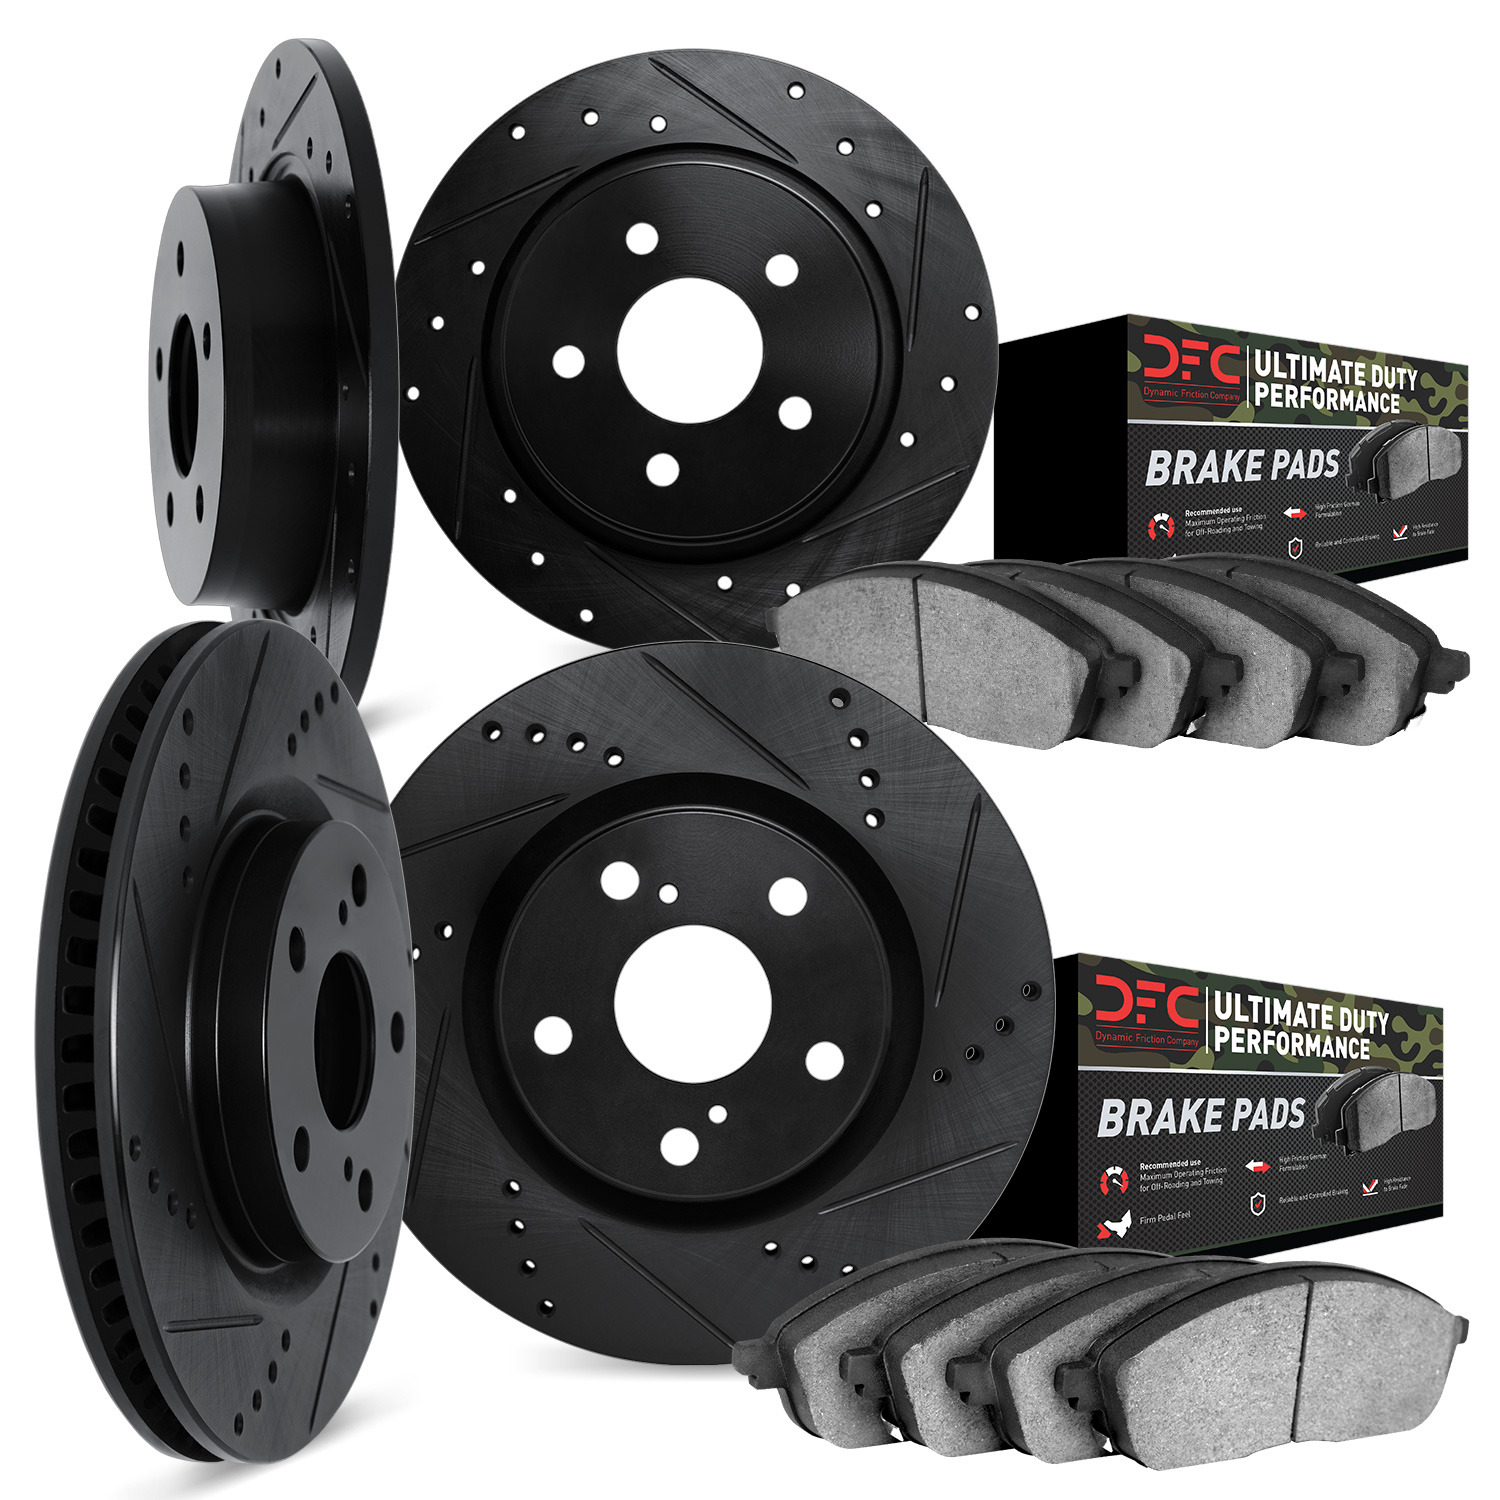 8404-42015 Drilled/Slotted Brake Rotors with Ultimate-Duty Brake Pads Kit [Black], 2003-2006 Mopar, Position: Front and Rear